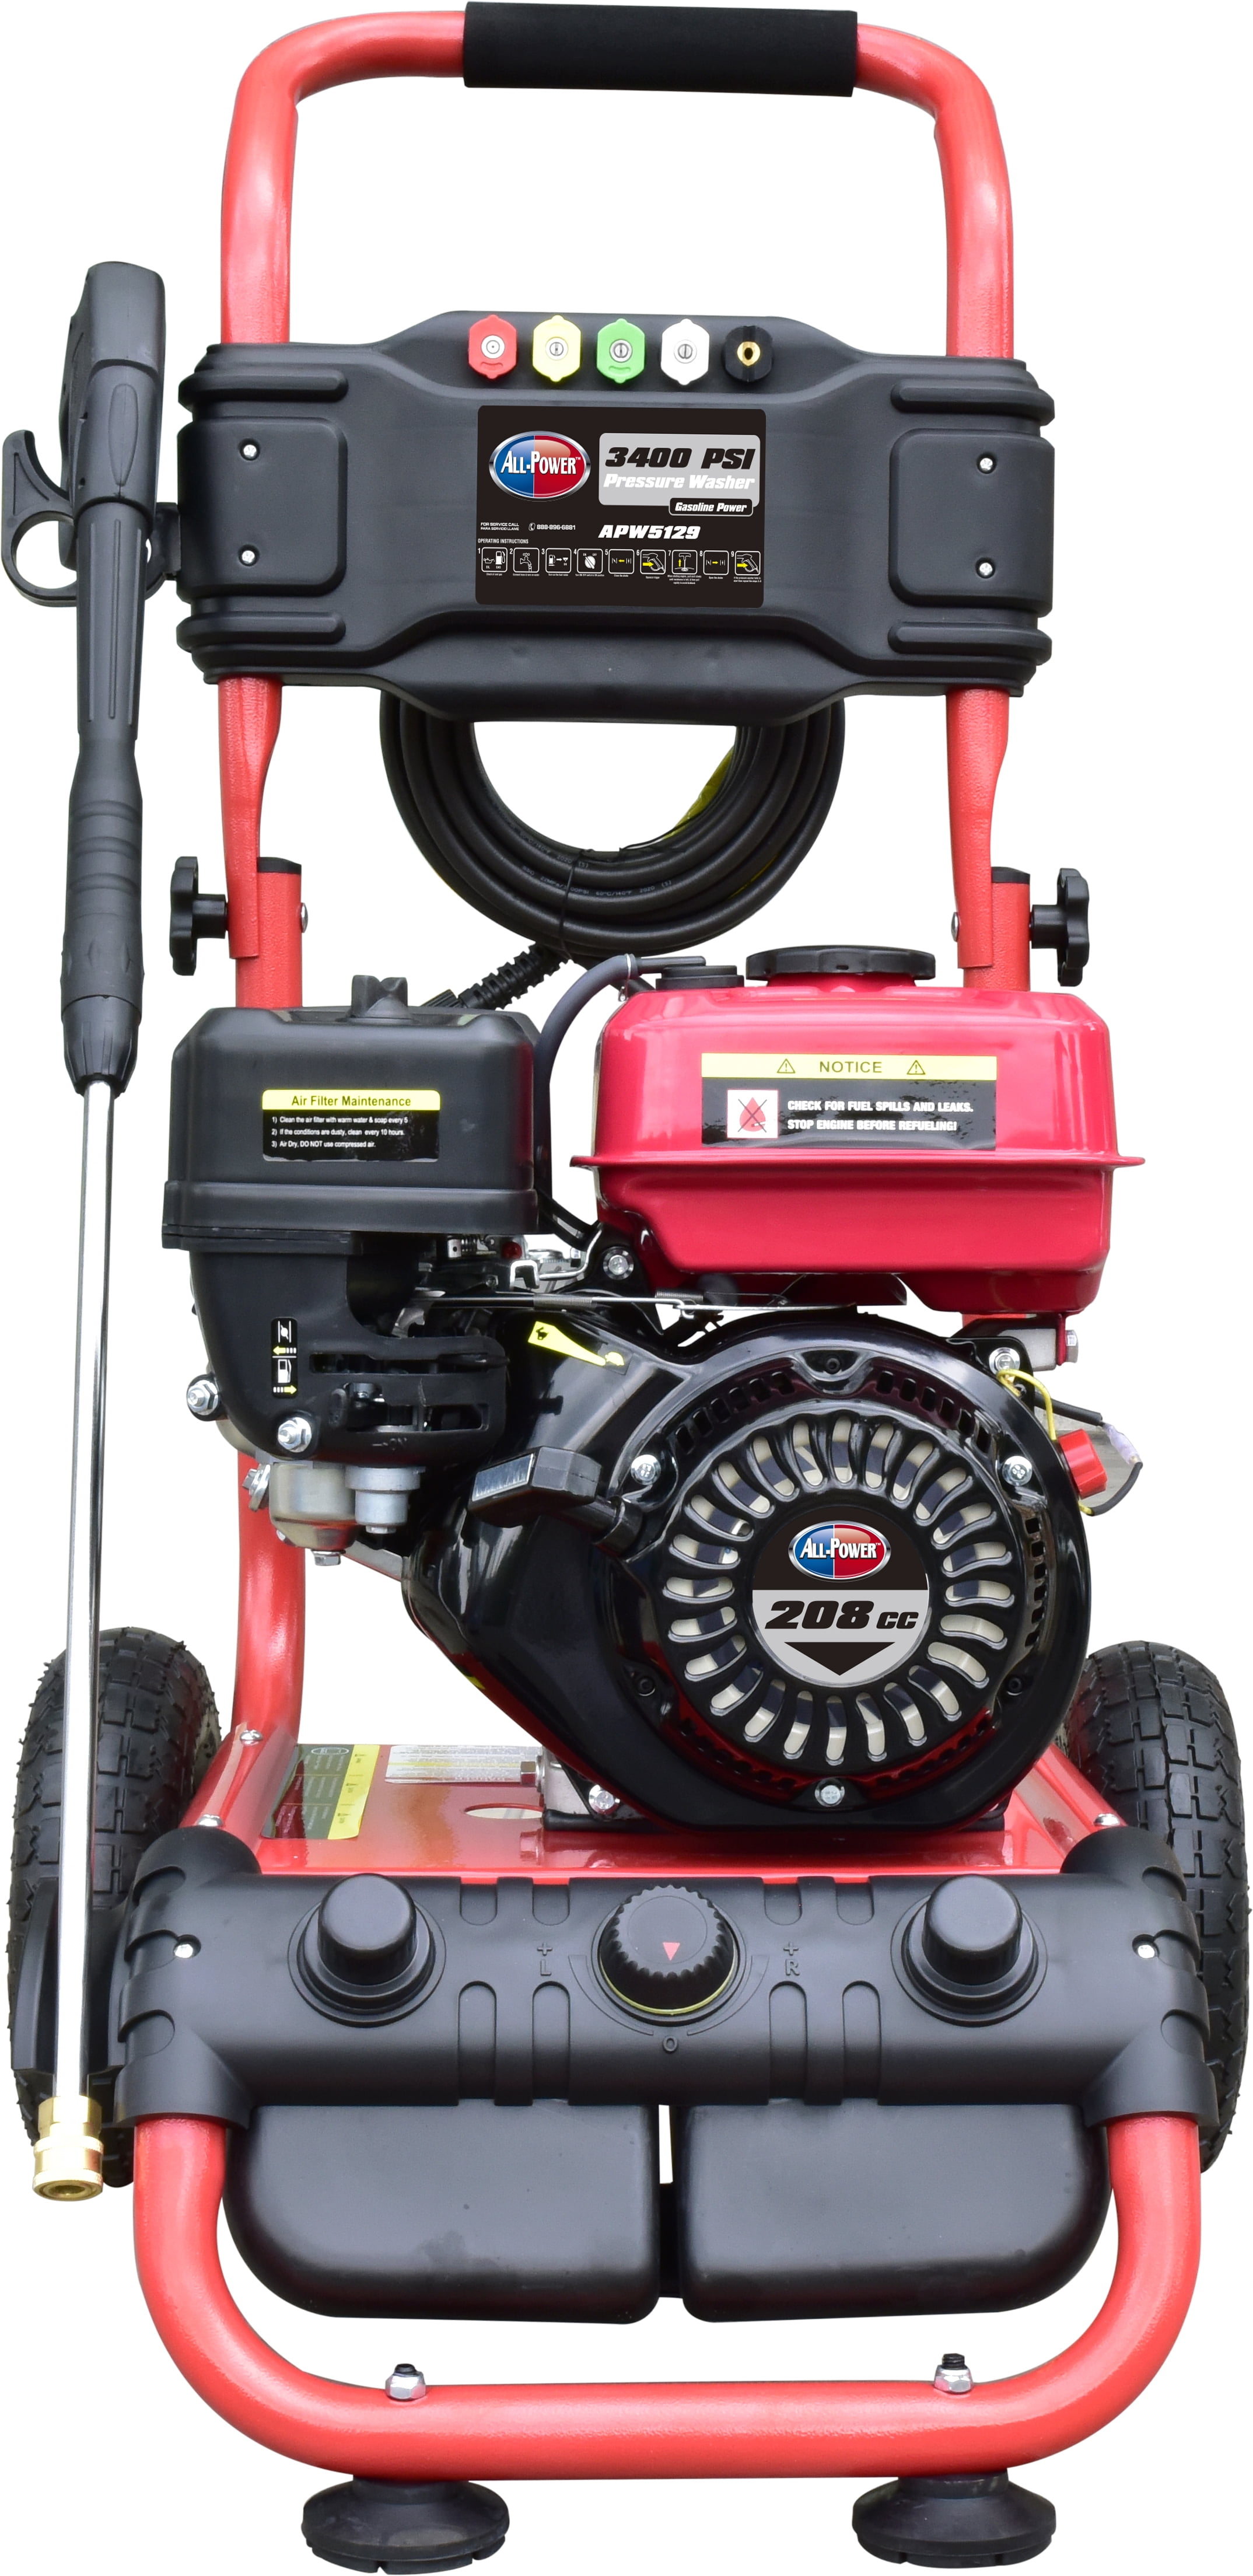 All Power 3400 PSI 2.6 GPM Gas Pressure Washer, 5 Adjustable Nozzles, 30 ft High Pressure Hose, Power Washer for Outdoor Cleaning, APW5129 - 1